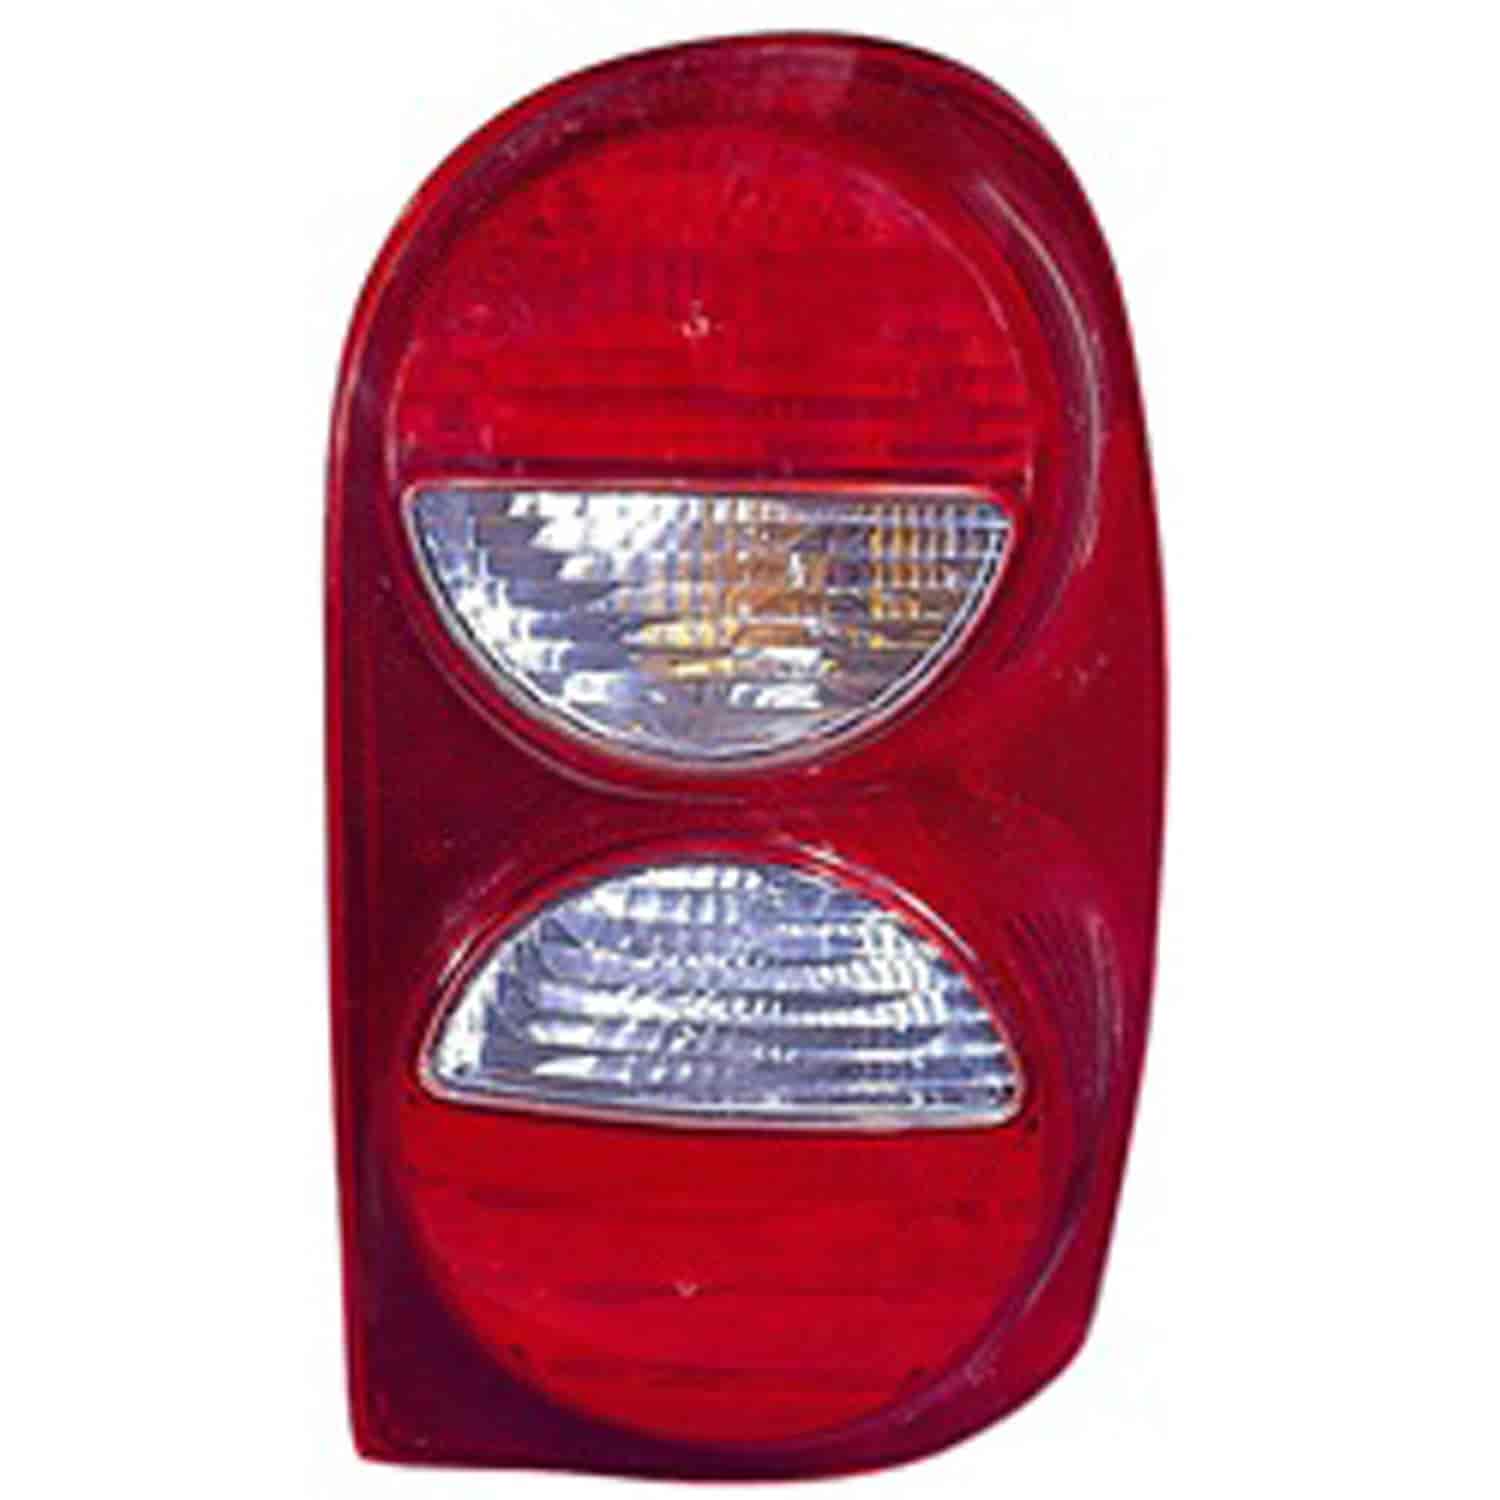 Replacement tail light assembly from Omix-ADA, Fits left side of 05-07 Jeep Liberty KJ without an air dam.